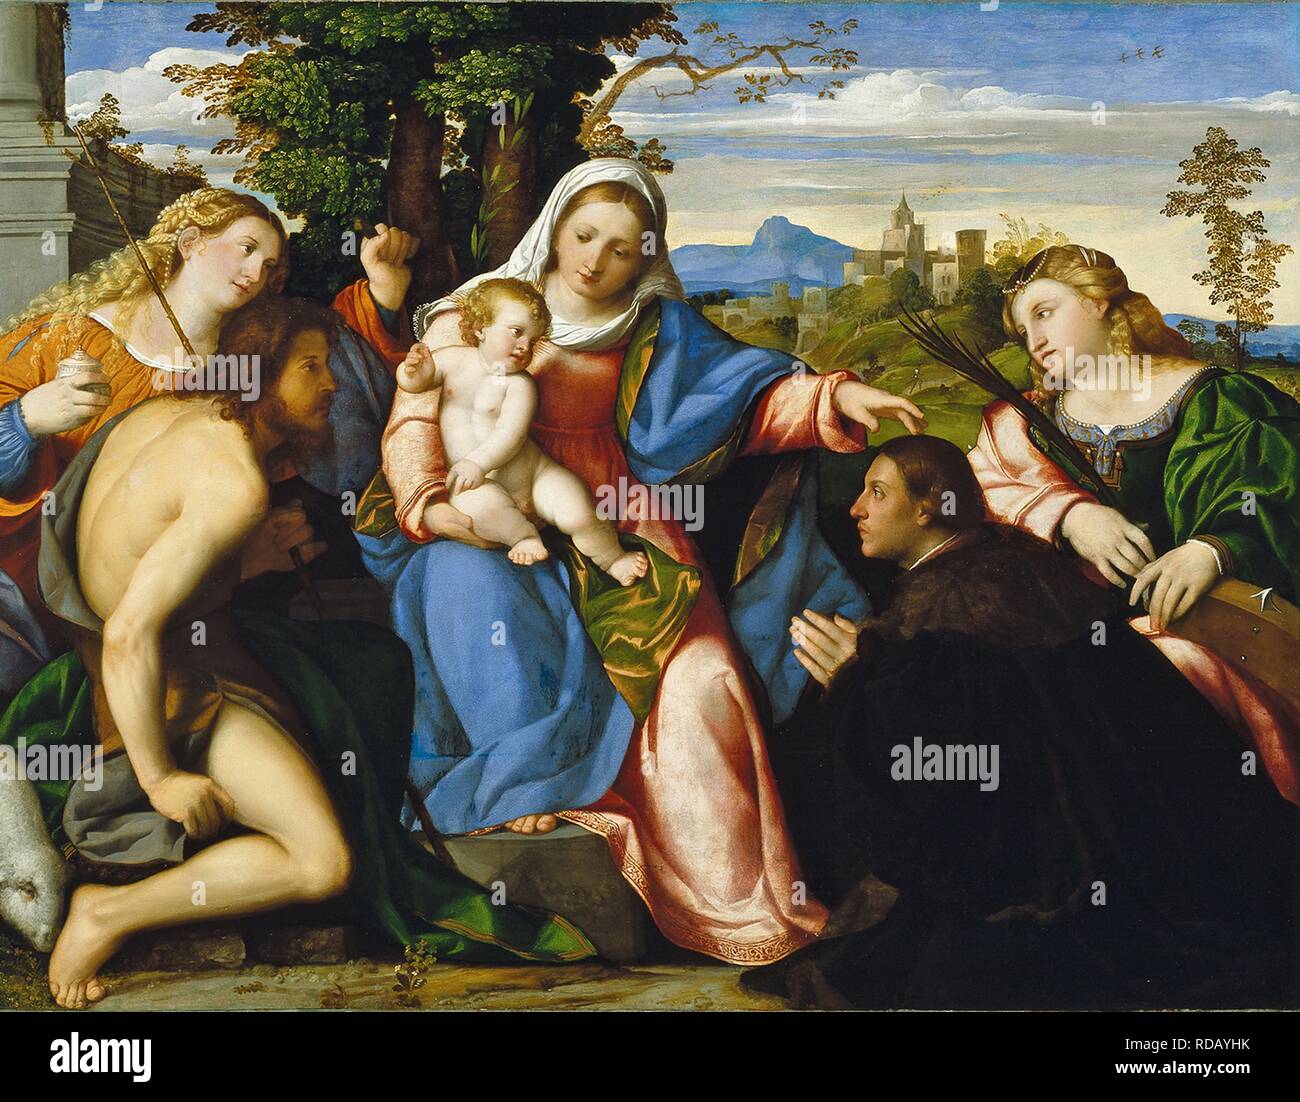 The Virgin and Child with Saints and a Donor. Museum: Thyssen-Bornemisza Collections. Author: Palma il Vecchio, Jacopo, the Elder. Stock Photo